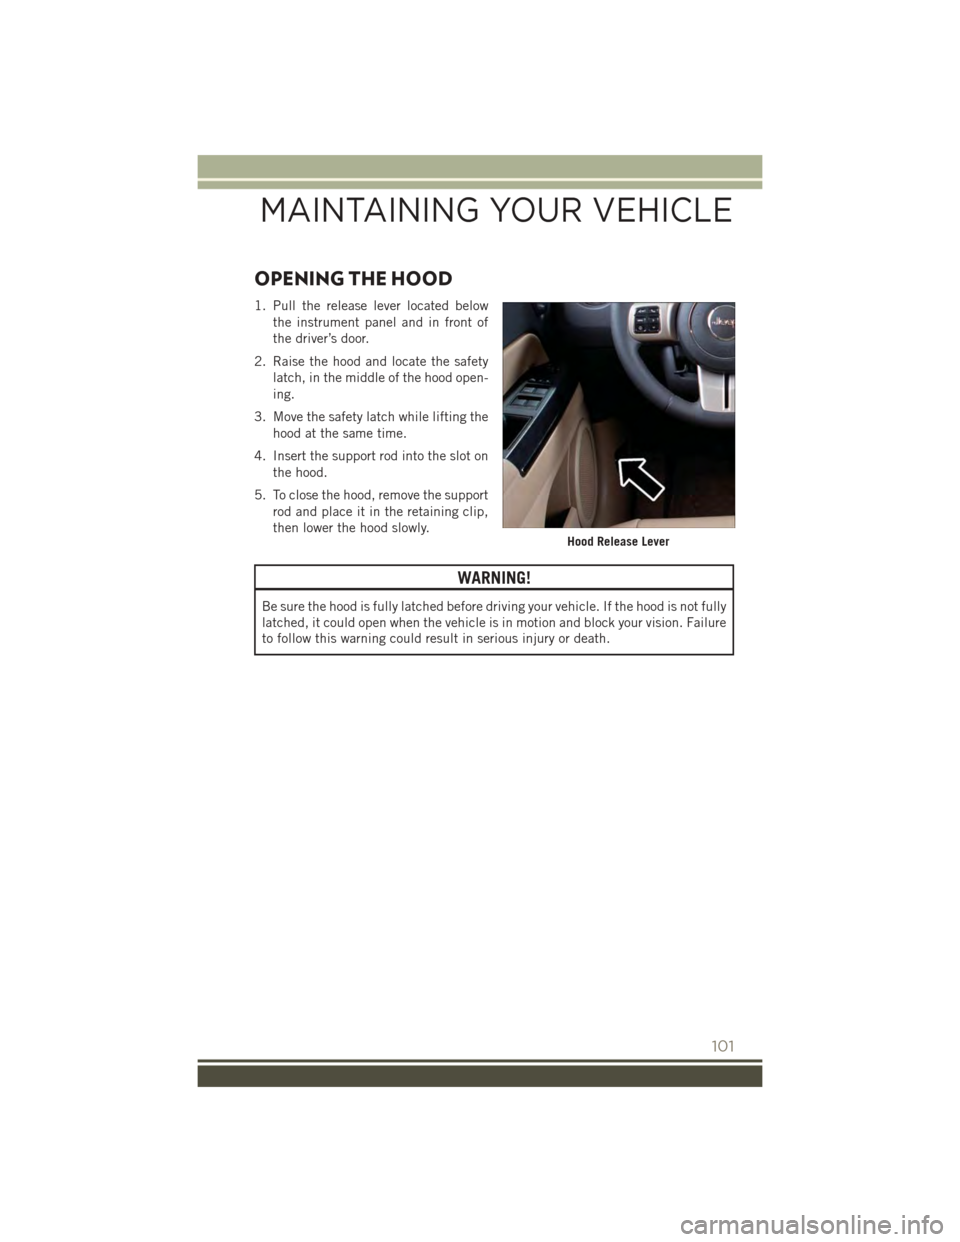 JEEP PATRIOT 2015 1.G User Guide OPENING THE HOOD
1. Pull the release lever located below
the instrument panel and in front of
the driver’s door.
2. Raise the hood and locate the safety
latch, in the middle of the hood open-
ing.
3